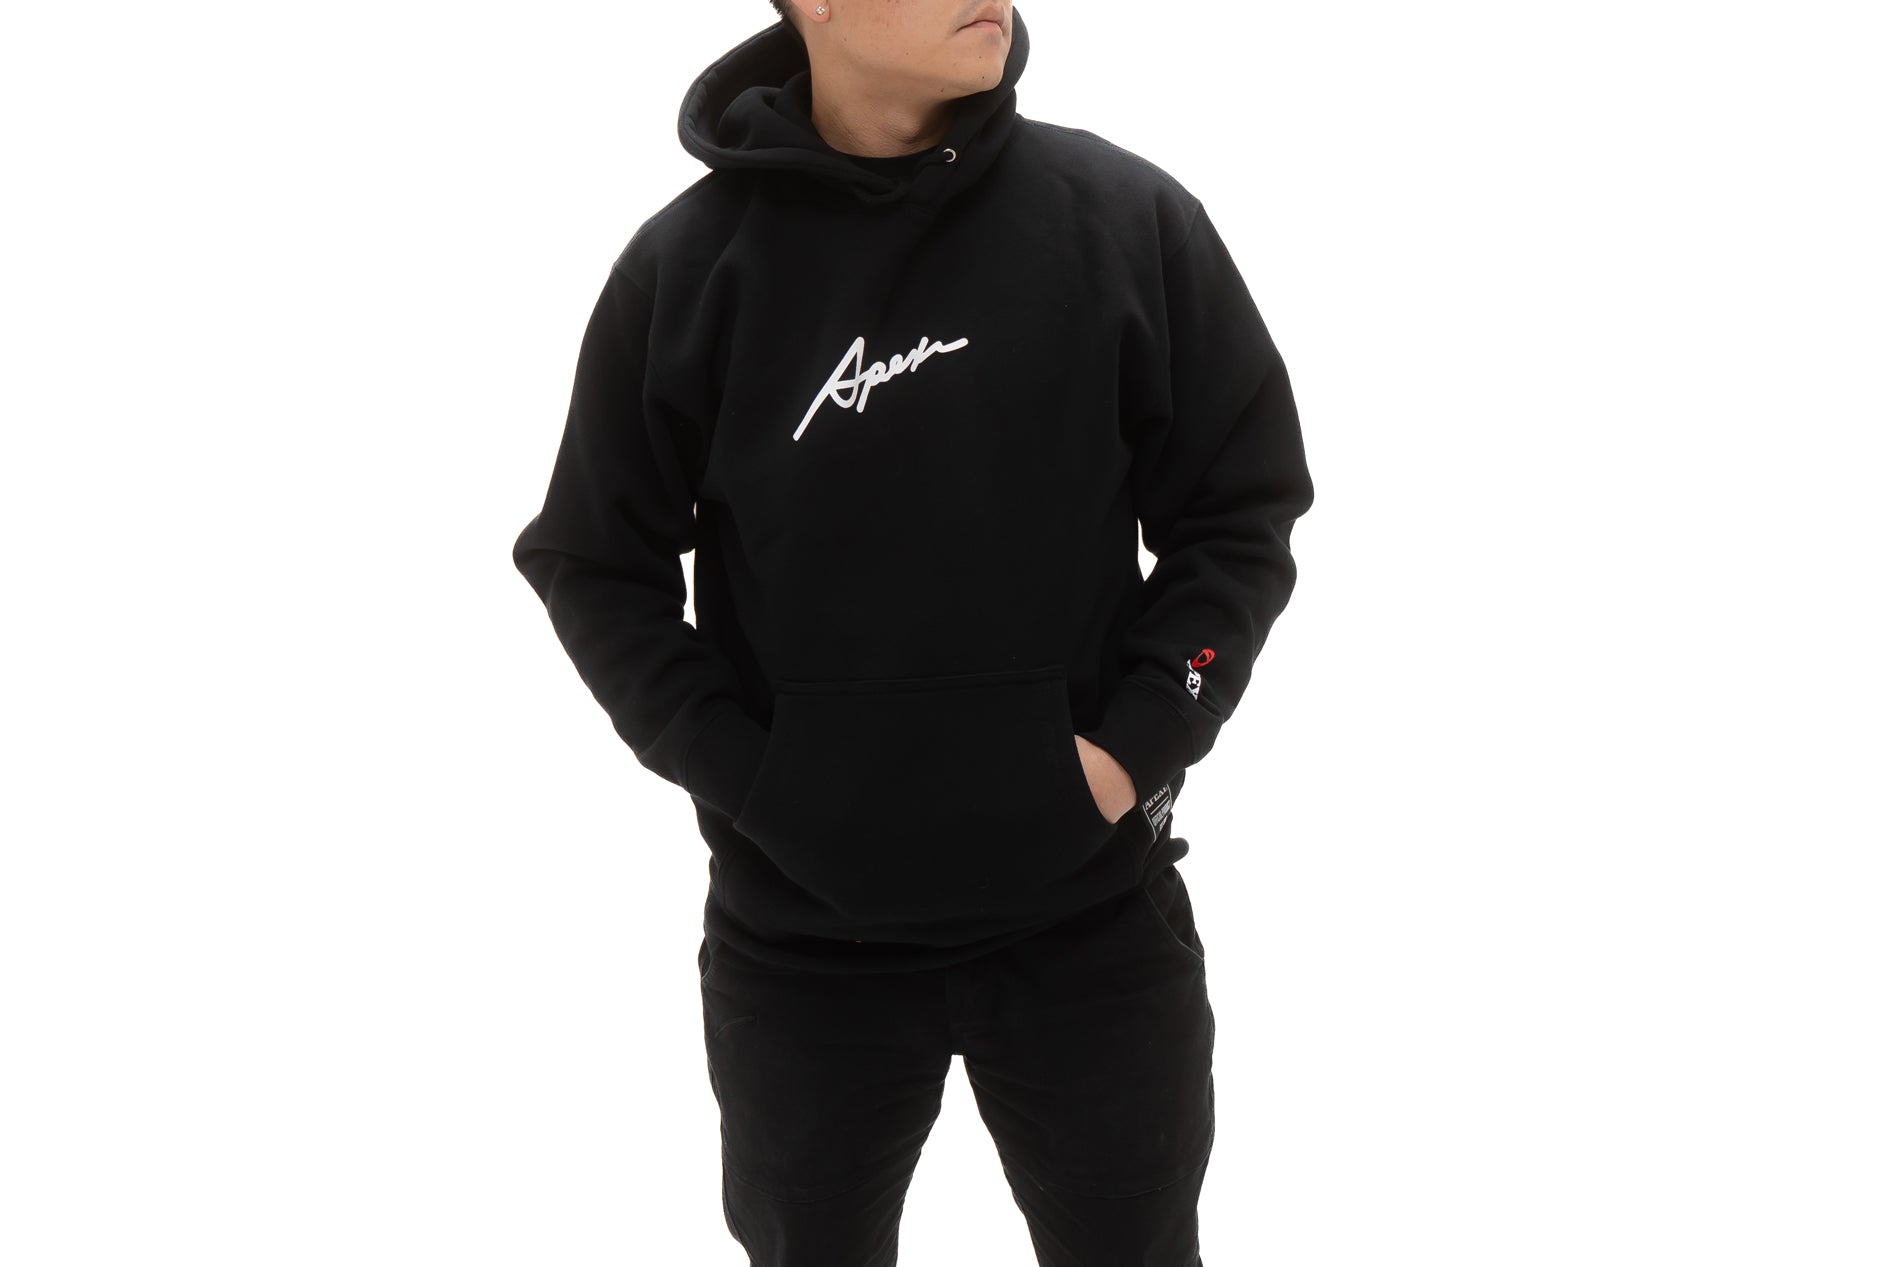 A'PEXi - A'PEXi Find Your Driving Emotion Hoodie